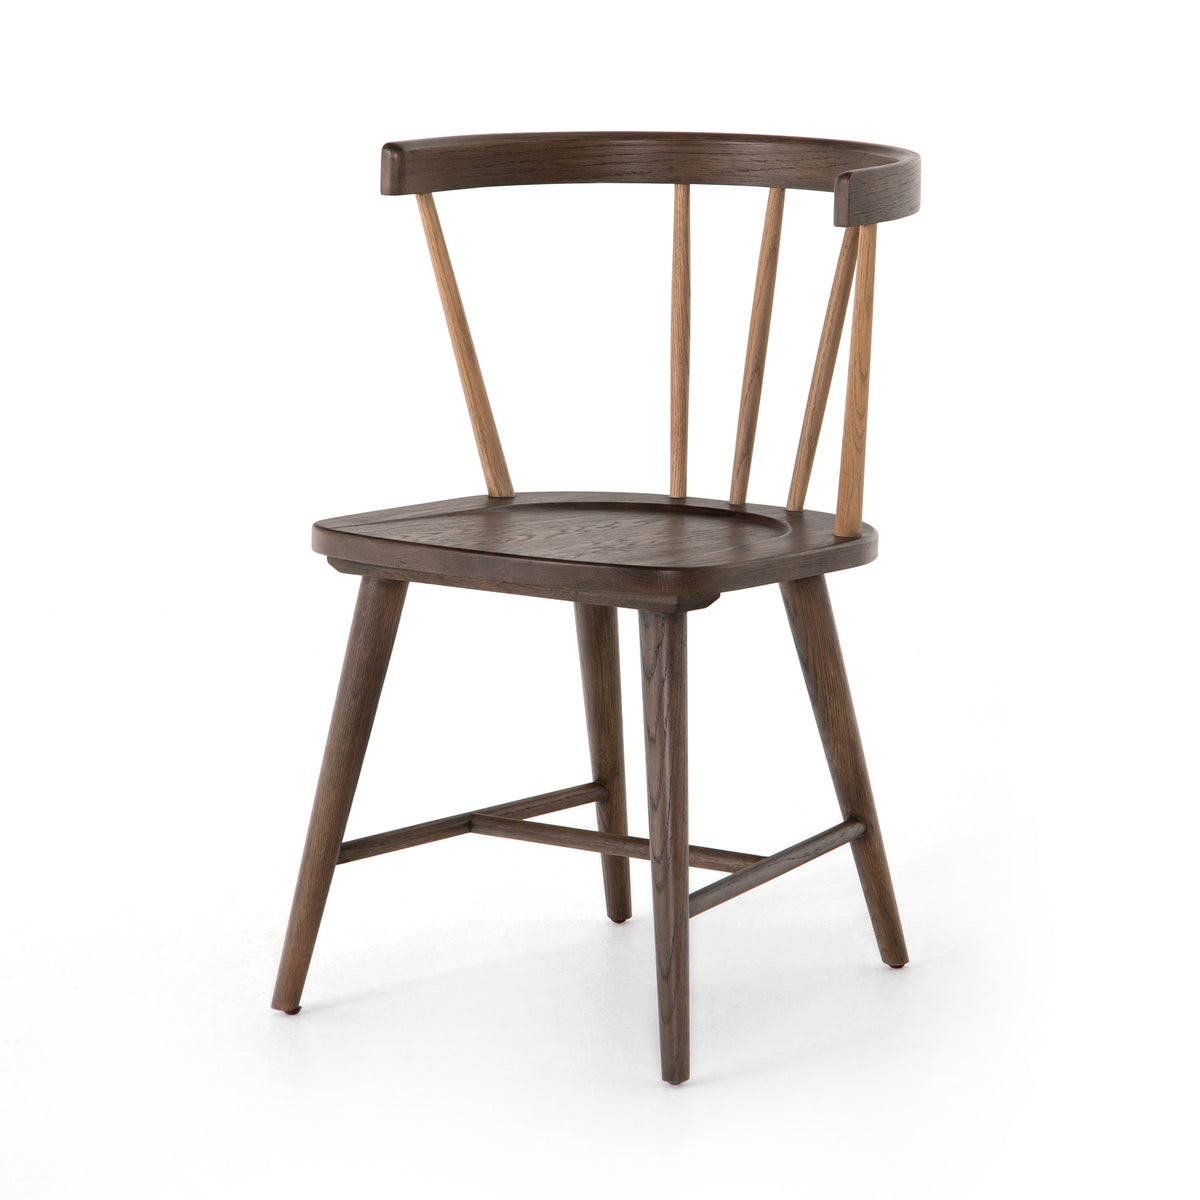 NAPLES DINING CHAIR